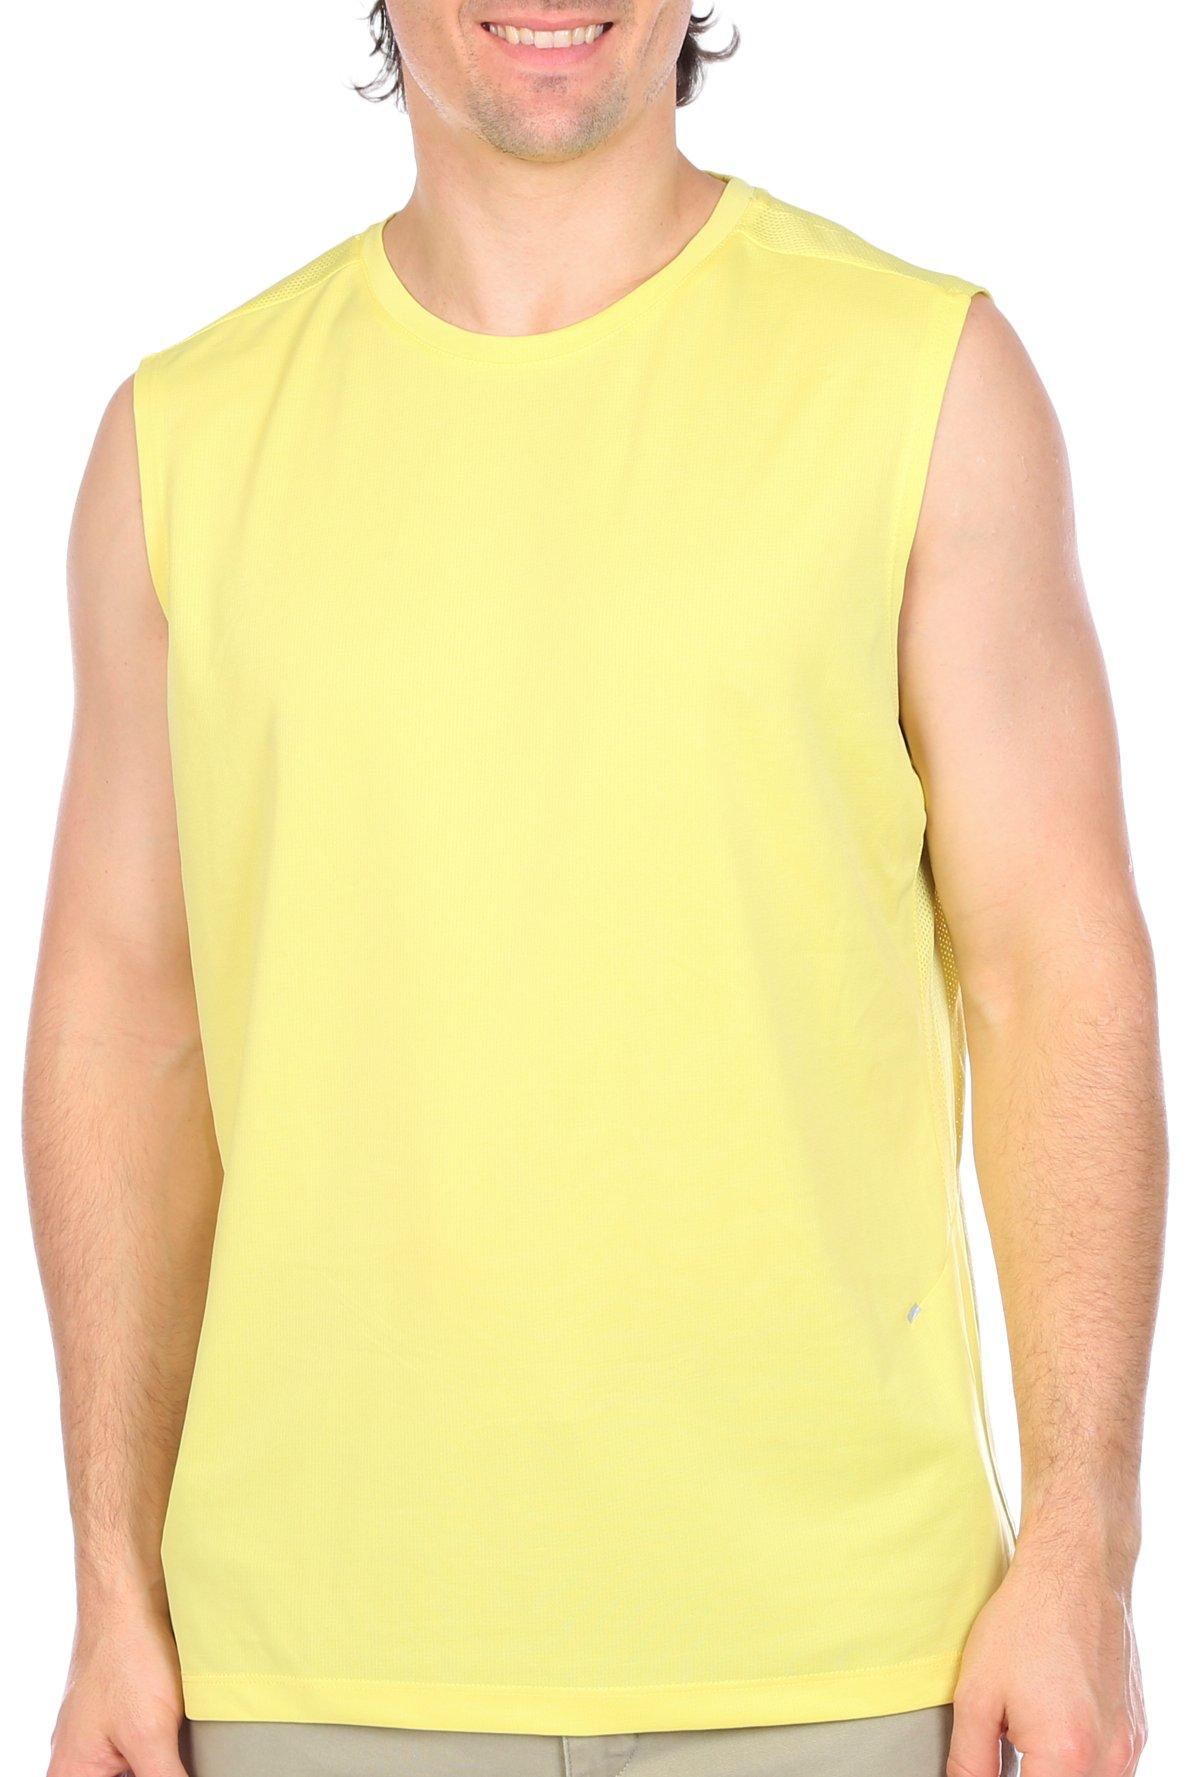 RB3 Active Mens Performance Solid Mesh  Muscle Top